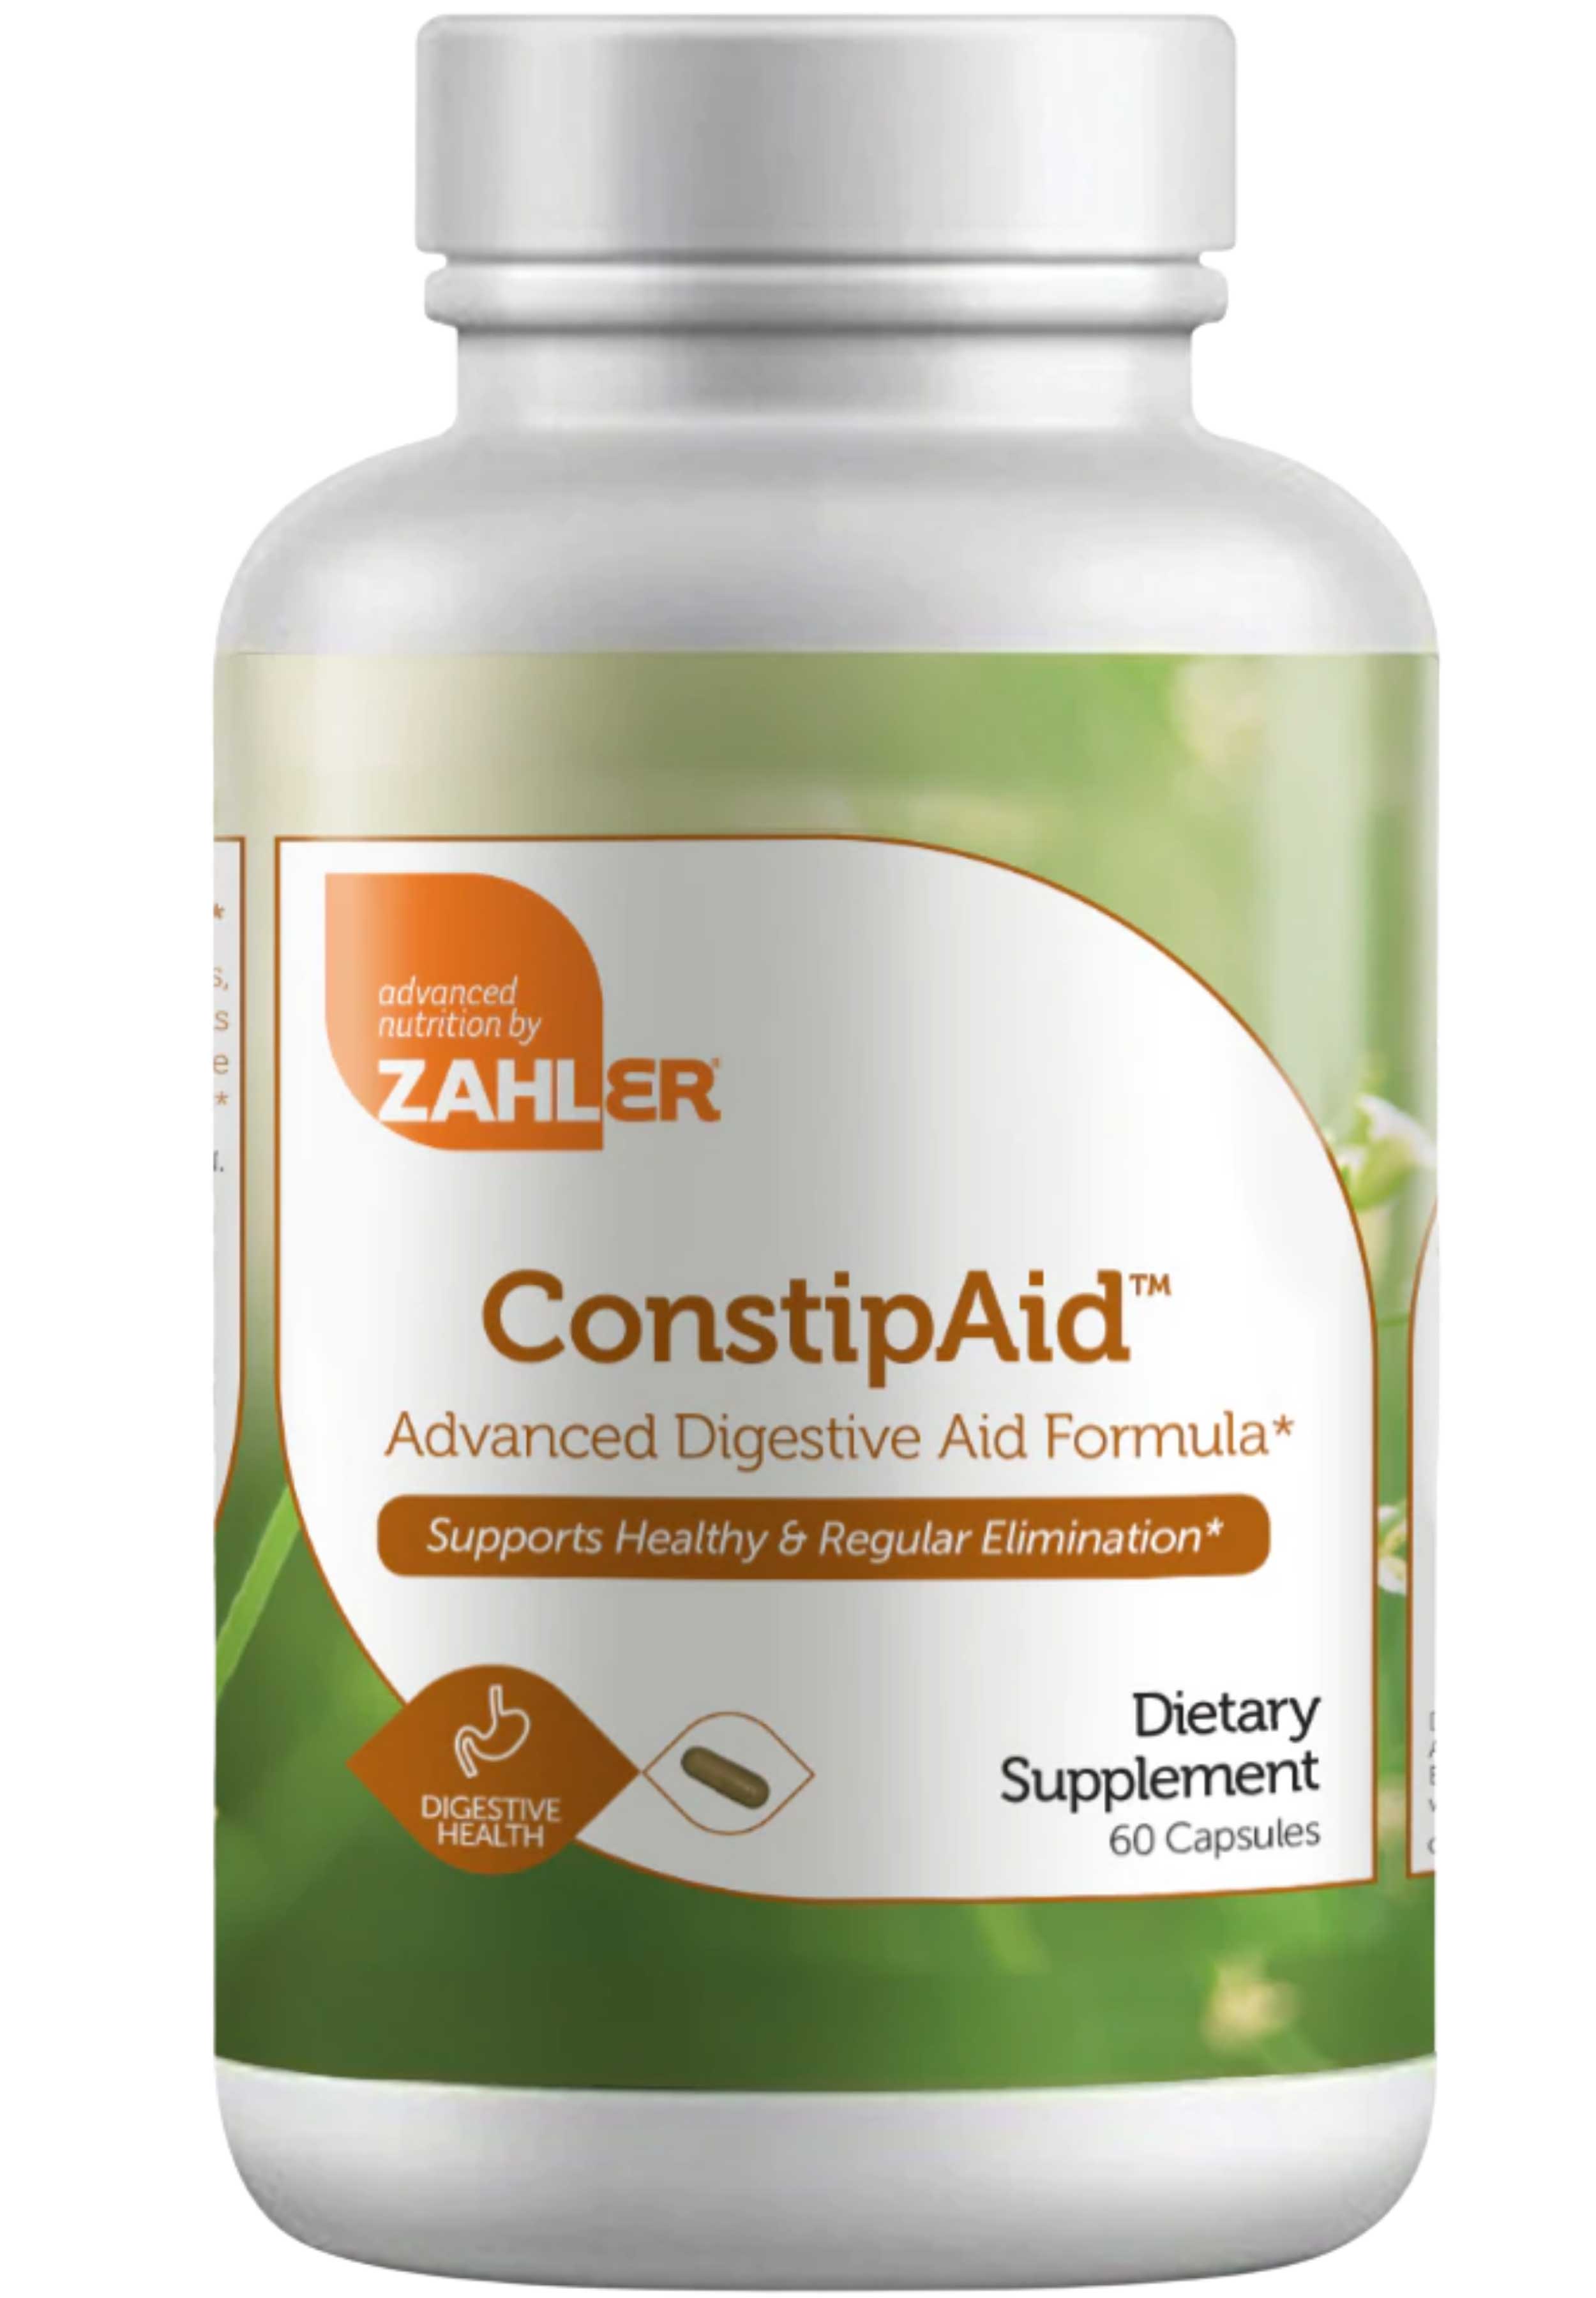 Advanced Nutrition By Zahler ConstipAid